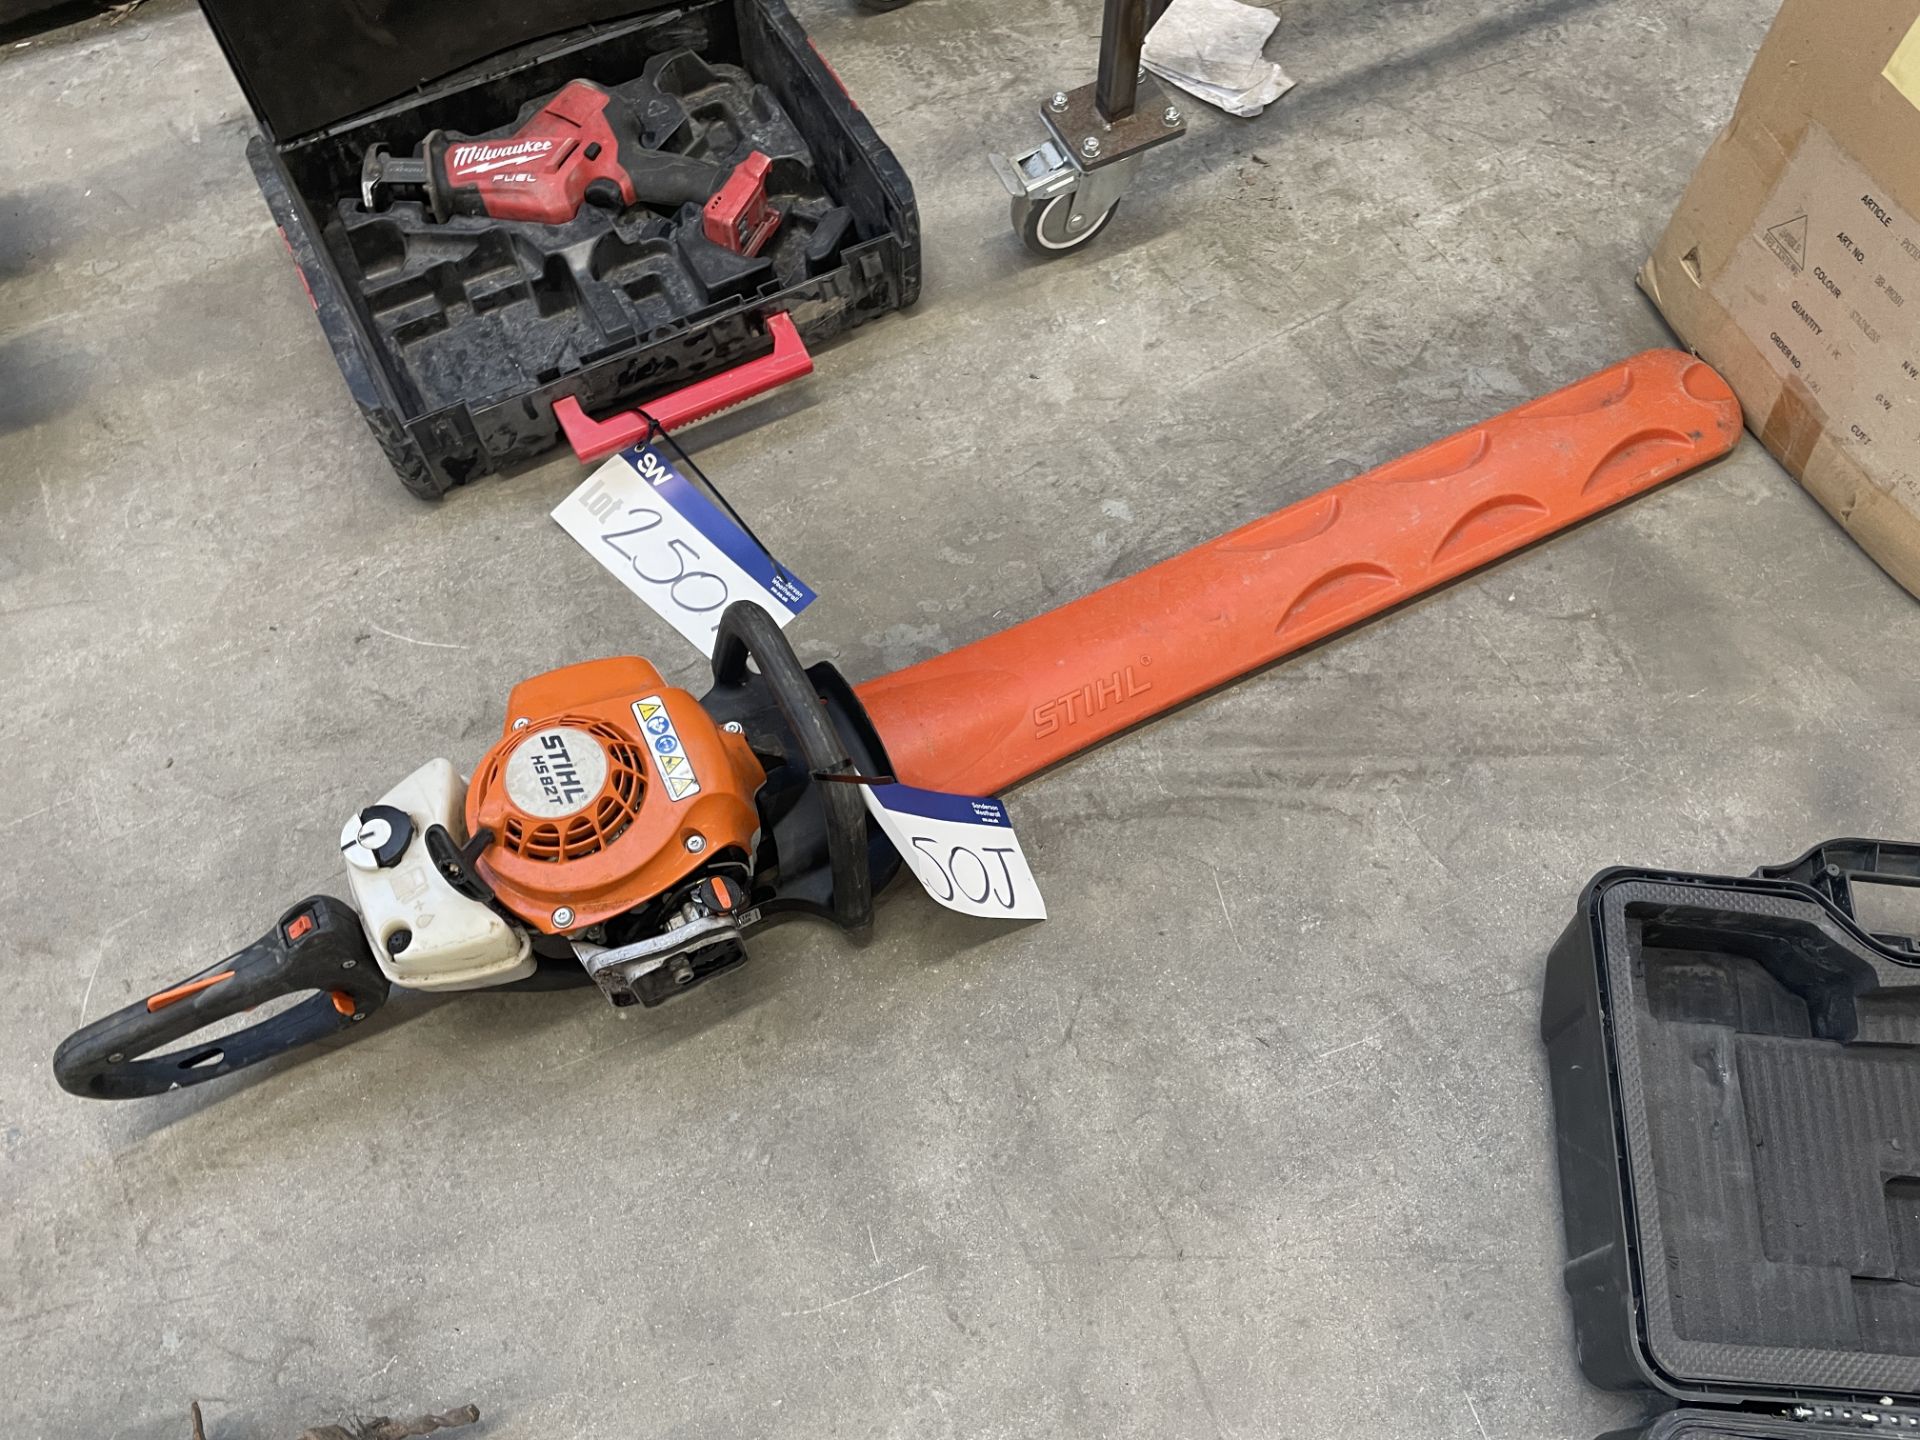 Stihl HS82T Hedge Trimmer (offered for sale by kind permission on behalf of another vendor) Please